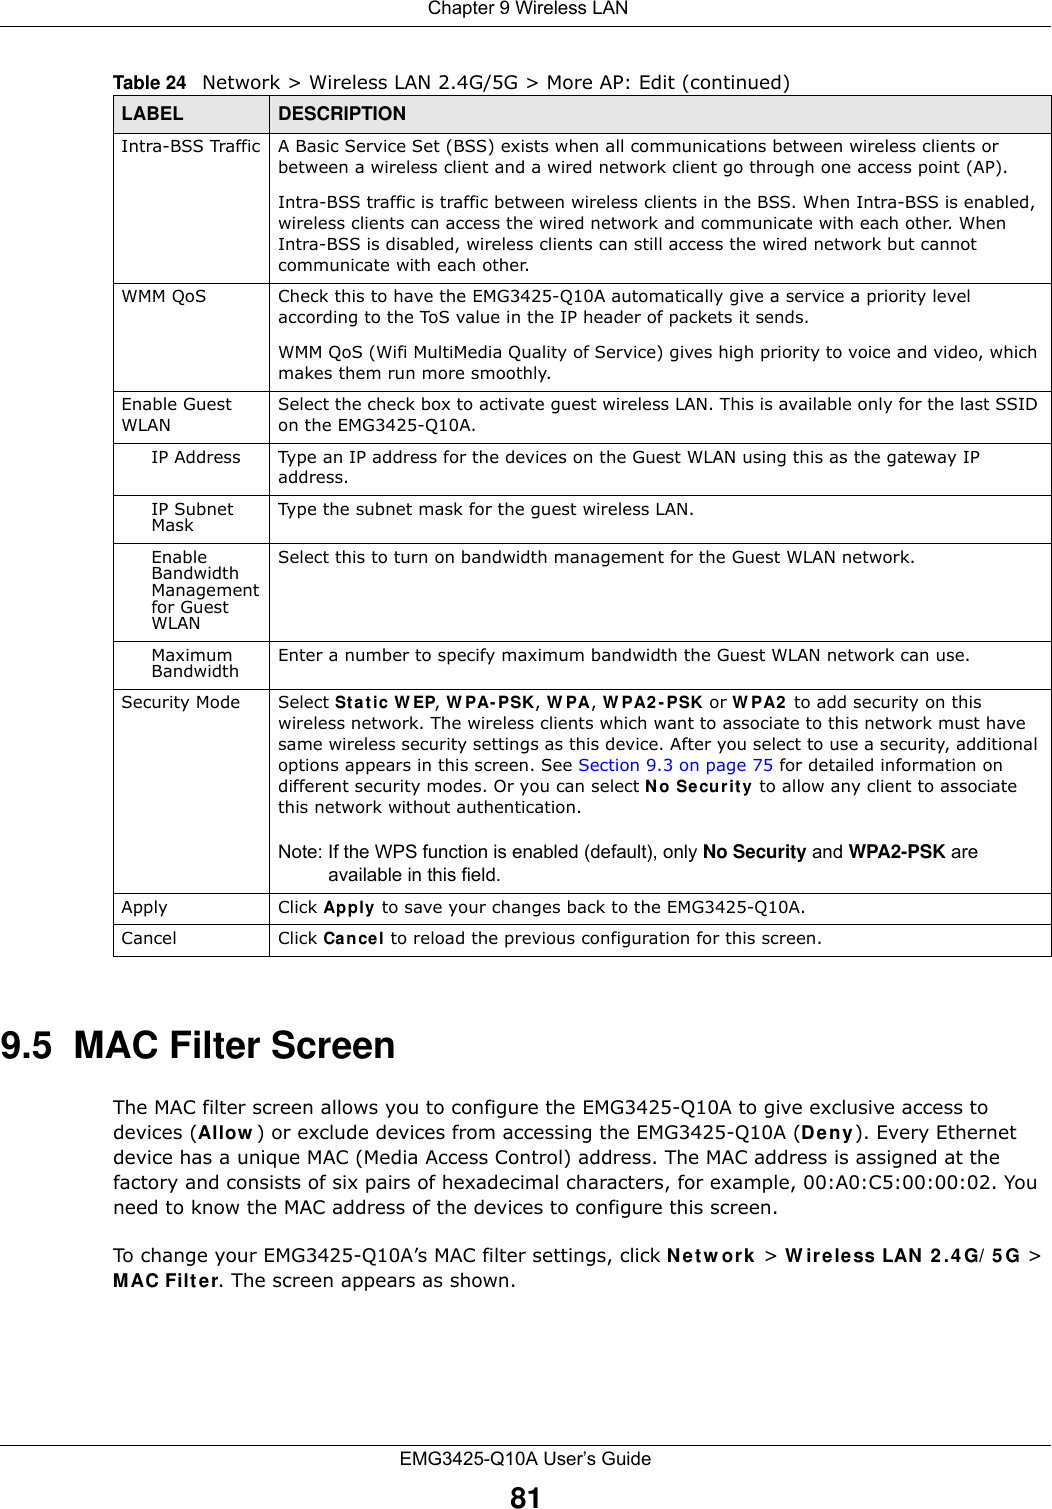  Chapter 9 Wireless LANEMG3425-Q10A User’s Guide819.5  MAC Filter Screen The MAC filter screen allows you to configure the EMG3425-Q10A to give exclusive access to devices (Allow ) or exclude devices from accessing the EMG3425-Q10A (De n y). Every Ethernet device has a unique MAC (Media Access Control) address. The MAC address is assigned at the factory and consists of six pairs of hexadecimal characters, for example, 00:A0:C5:00:00:02. You need to know the MAC address of the devices to configure this screen.To change your EMG3425-Q10A’s MAC filter settings, click N e t w or k &gt; W ir e less LAN  2 .4 G/ 5 G &gt; MAC Filt e r. The screen appears as shown.Intra-BSS Traffic A Basic Service Set (BSS) exists when all communications between wireless clients or between a wireless client and a wired network client go through one access point (AP). Intra-BSS traffic is traffic between wireless clients in the BSS. When Intra-BSS is enabled, wireless clients can access the wired network and communicate with each other. When Intra-BSS is disabled, wireless clients can still access the wired network but cannot communicate with each other.WMM QoS Check this to have the EMG3425-Q10A automatically give a service a priority level according to the ToS value in the IP header of packets it sends. WMM QoS (Wifi MultiMedia Quality of Service) gives high priority to voice and video, which makes them run more smoothly.Enable Guest WLANSelect the check box to activate guest wireless LAN. This is available only for the last SSID on the EMG3425-Q10A.IP Address Type an IP address for the devices on the Guest WLAN using this as the gateway IP address.IP Subnet Mask  Type the subnet mask for the guest wireless LAN.Enable Bandwidth Management for Guest WLAN Select this to turn on bandwidth management for the Guest WLAN network.Maximum Bandwidth  Enter a number to specify maximum bandwidth the Guest WLAN network can use.Security Mode Select Static W EP, W PA- PSK, W PA, W PA2 - PSK or W PA2  to add security on this wireless network. The wireless clients which want to associate to this network must have same wireless security settings as this device. After you select to use a security, additional options appears in this screen. See Section 9.3 on page 75 for detailed information on different security modes. Or you can select N o Se cur it y  to allow any client to associate this network without authentication.Note: If the WPS function is enabled (default), only No Security and WPA2-PSK are available in this field.Apply Click Apply  to save your changes back to the EMG3425-Q10A.Cancel Click Cancel to reload the previous configuration for this screen.Table 24   Network &gt; Wireless LAN 2.4G/5G &gt; More AP: Edit (continued)LABEL DESCRIPTION